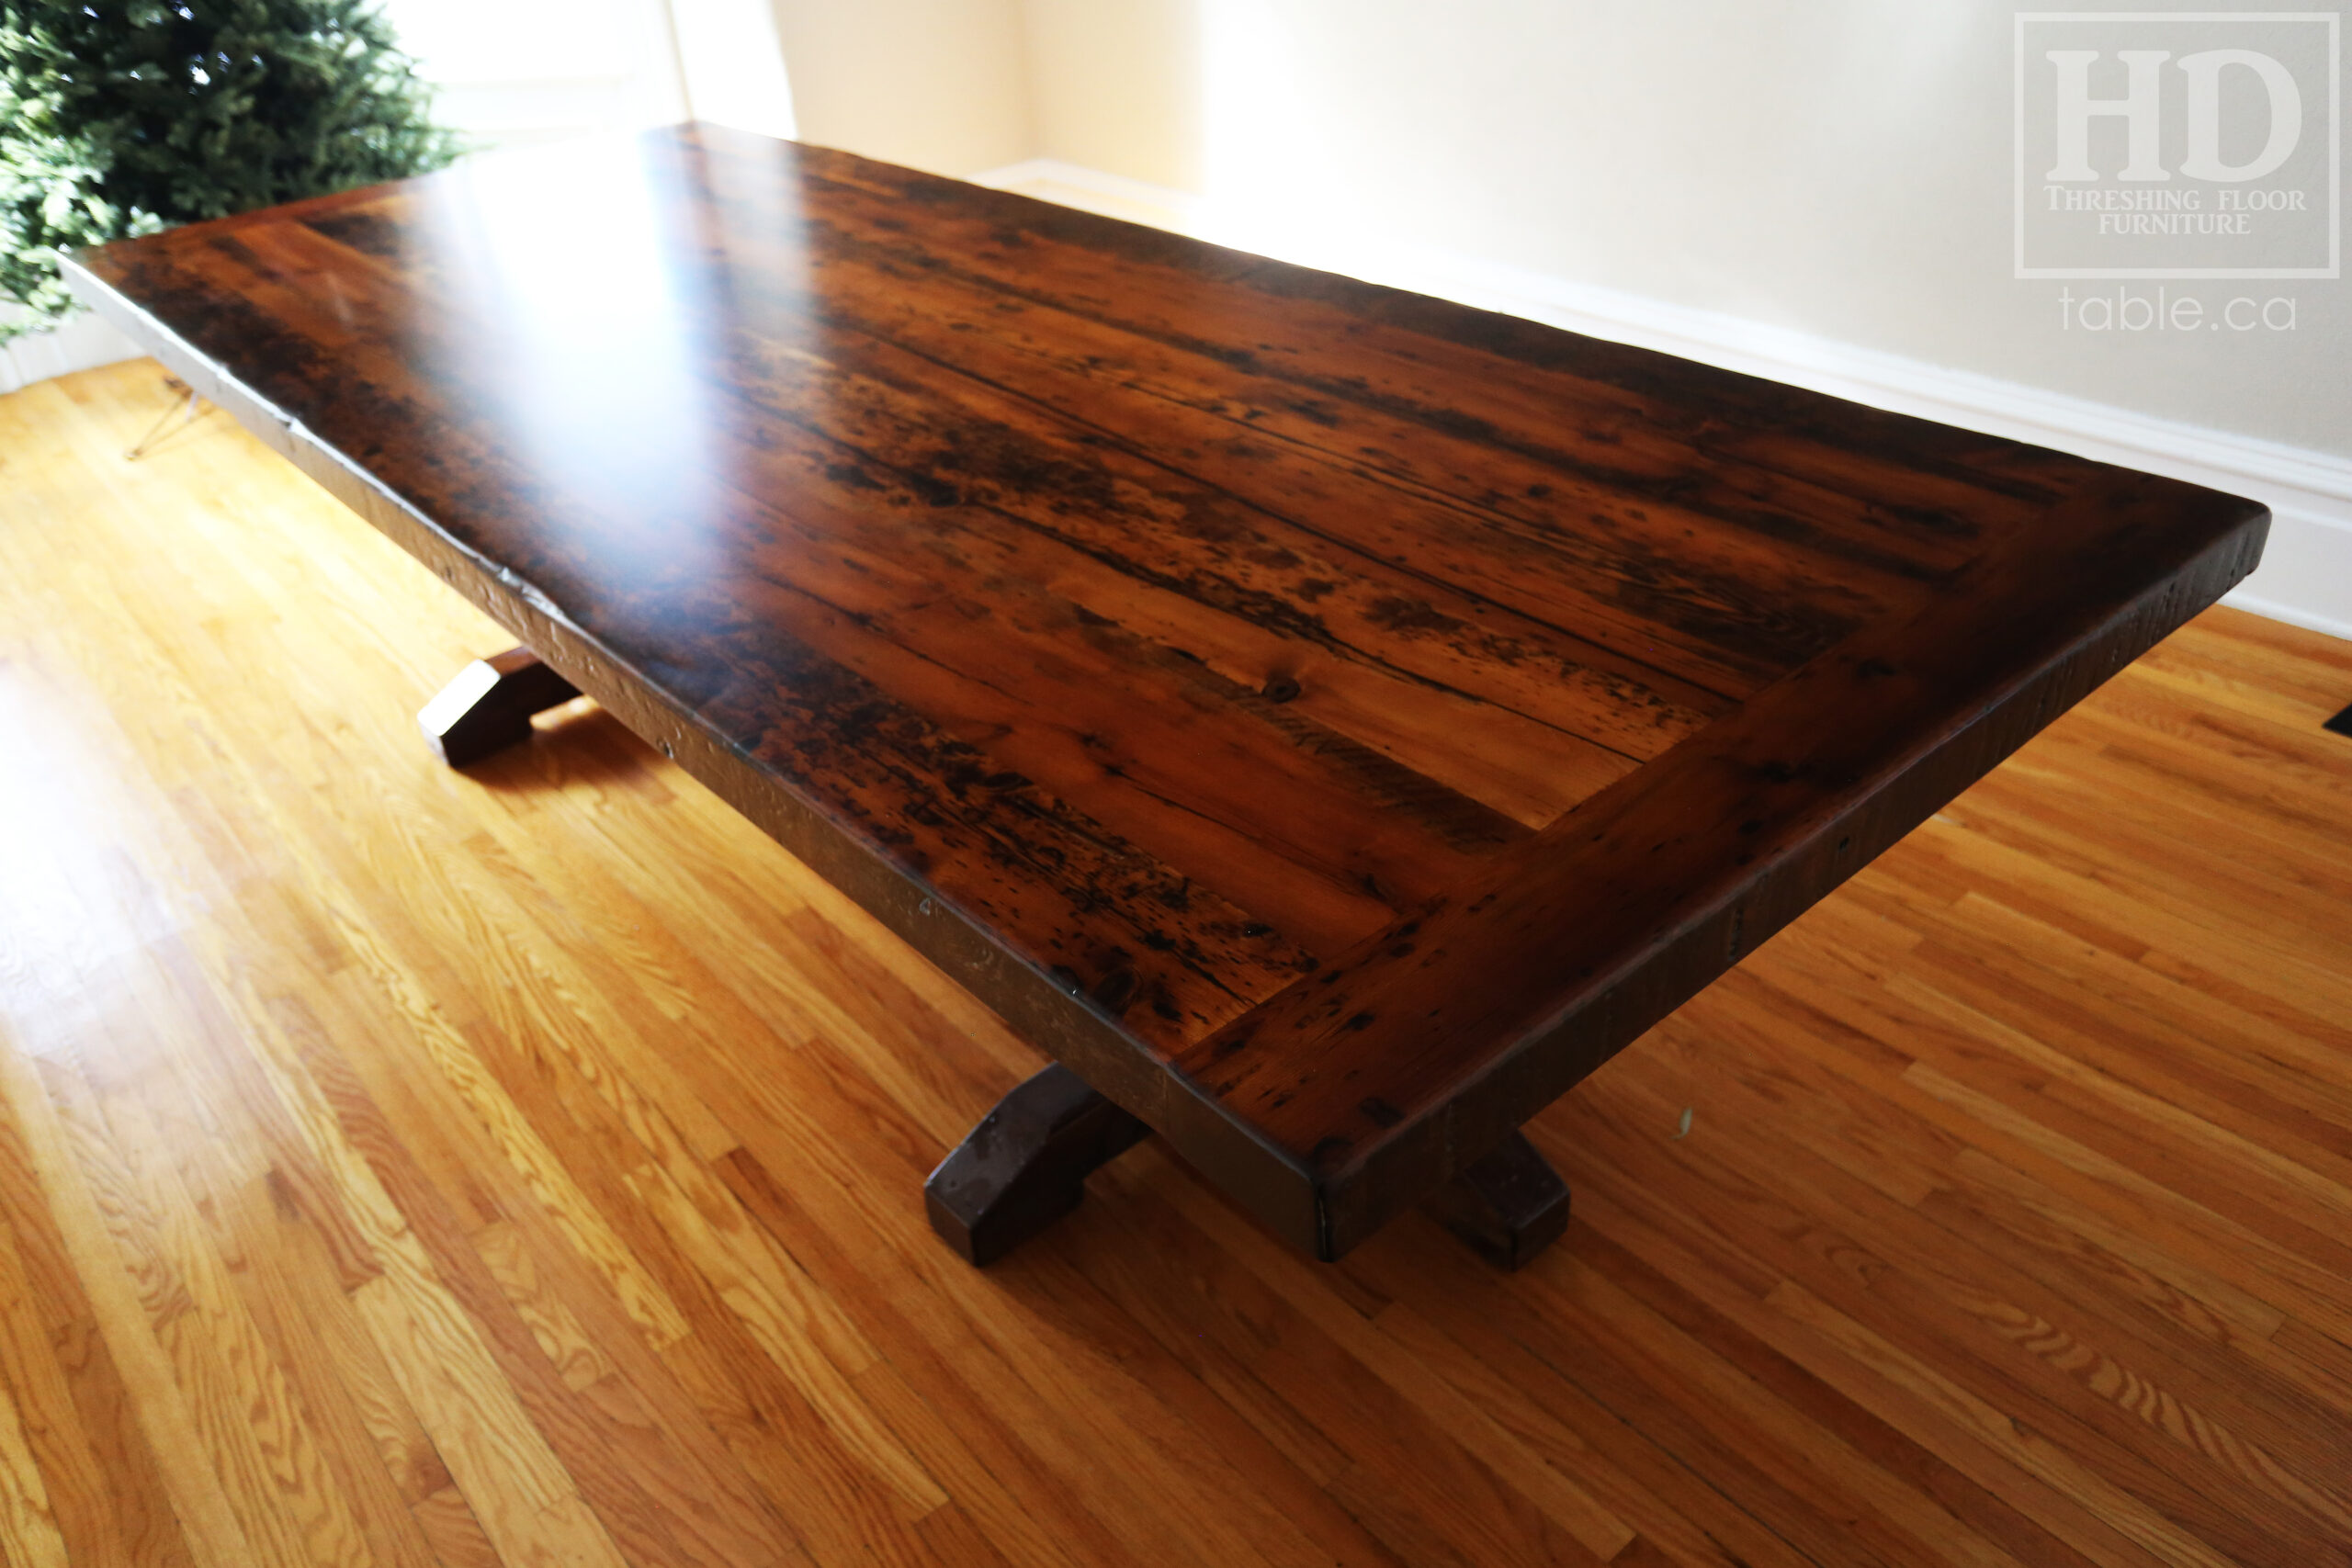 10' Ontario Barnwood Modern Table we made for a Port Perry, Ontario home - 48" wide - Hand-Hewn Beam Pedestals Base - 3" thick top top option - Mitred Corners - Hemlock Threshing Floor Construction - Original edges & distressing maintained - Premium epoxy + satin polyurethane finish - www.table.ca